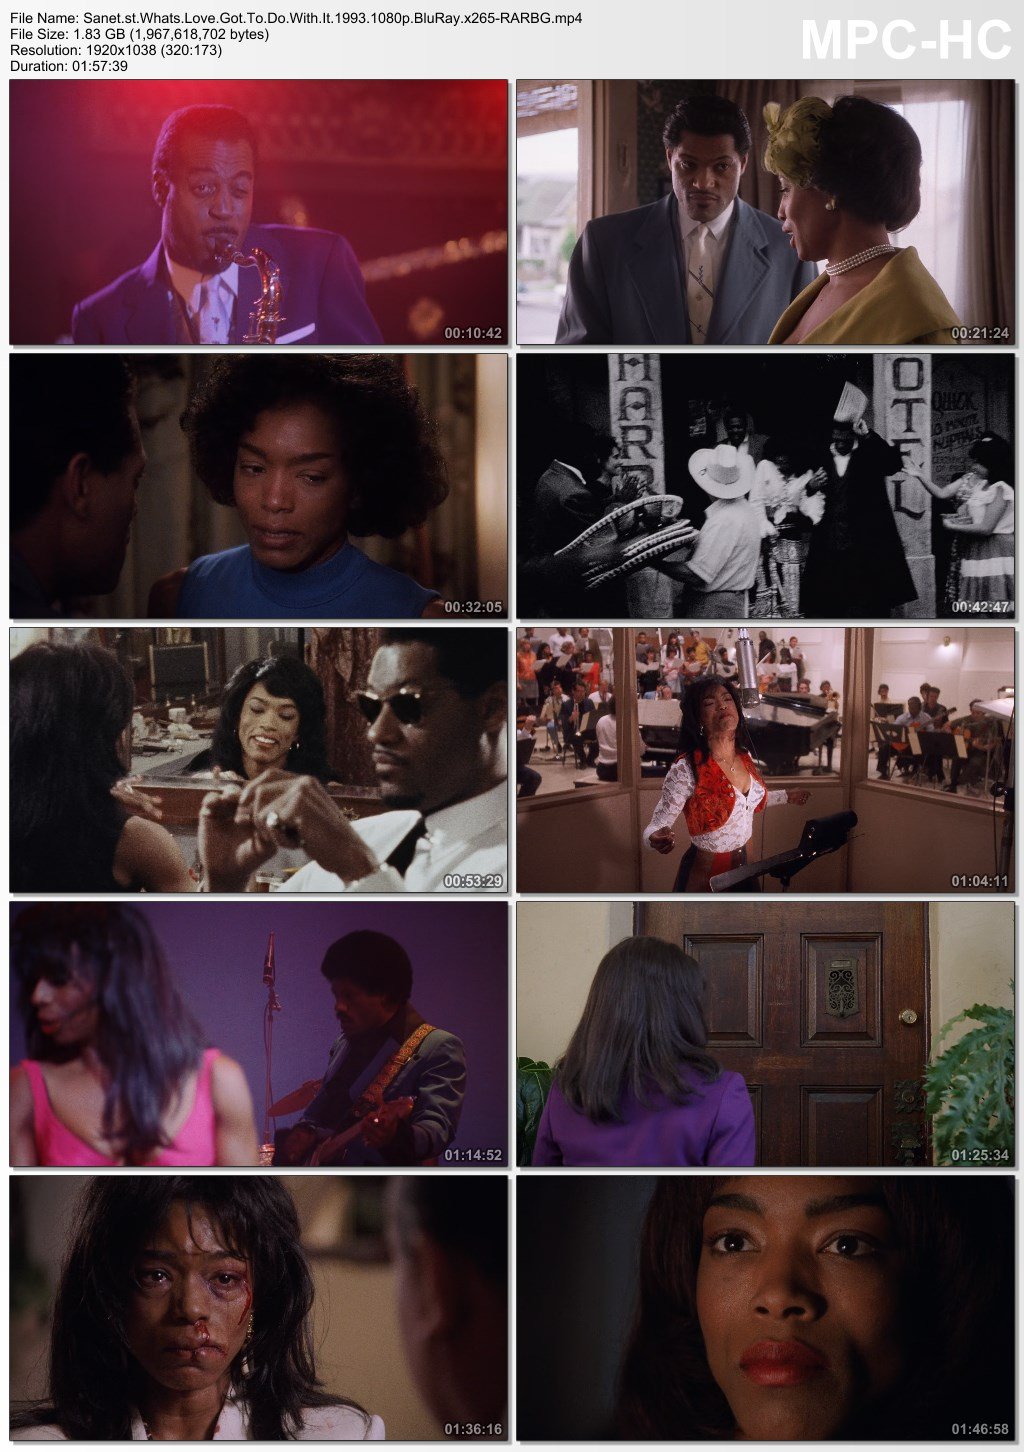 Download Whats Love Got To Do With It 1993 1080p BluRay x265-RARBG - Movie What's Love Got To Do With It